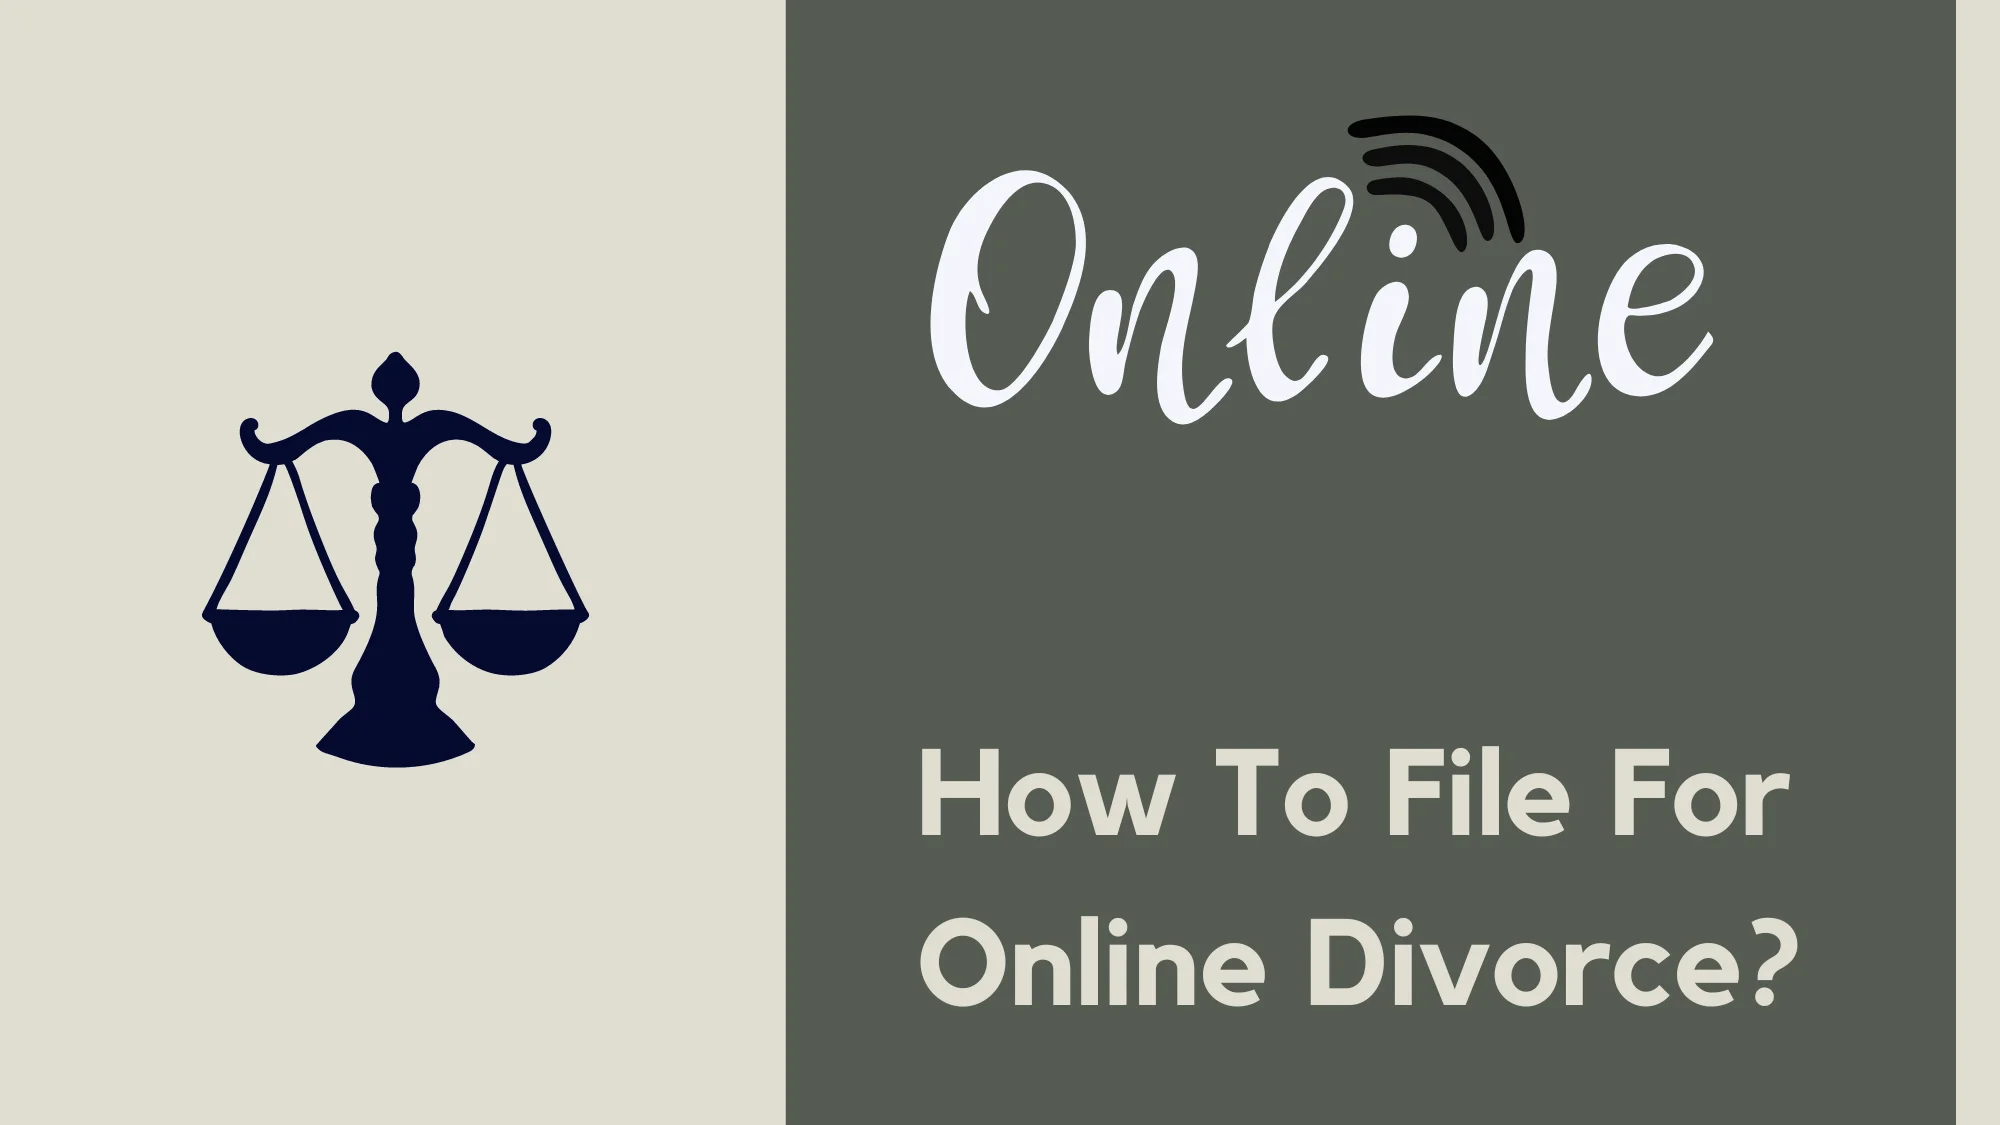 How To File For Online Divorce